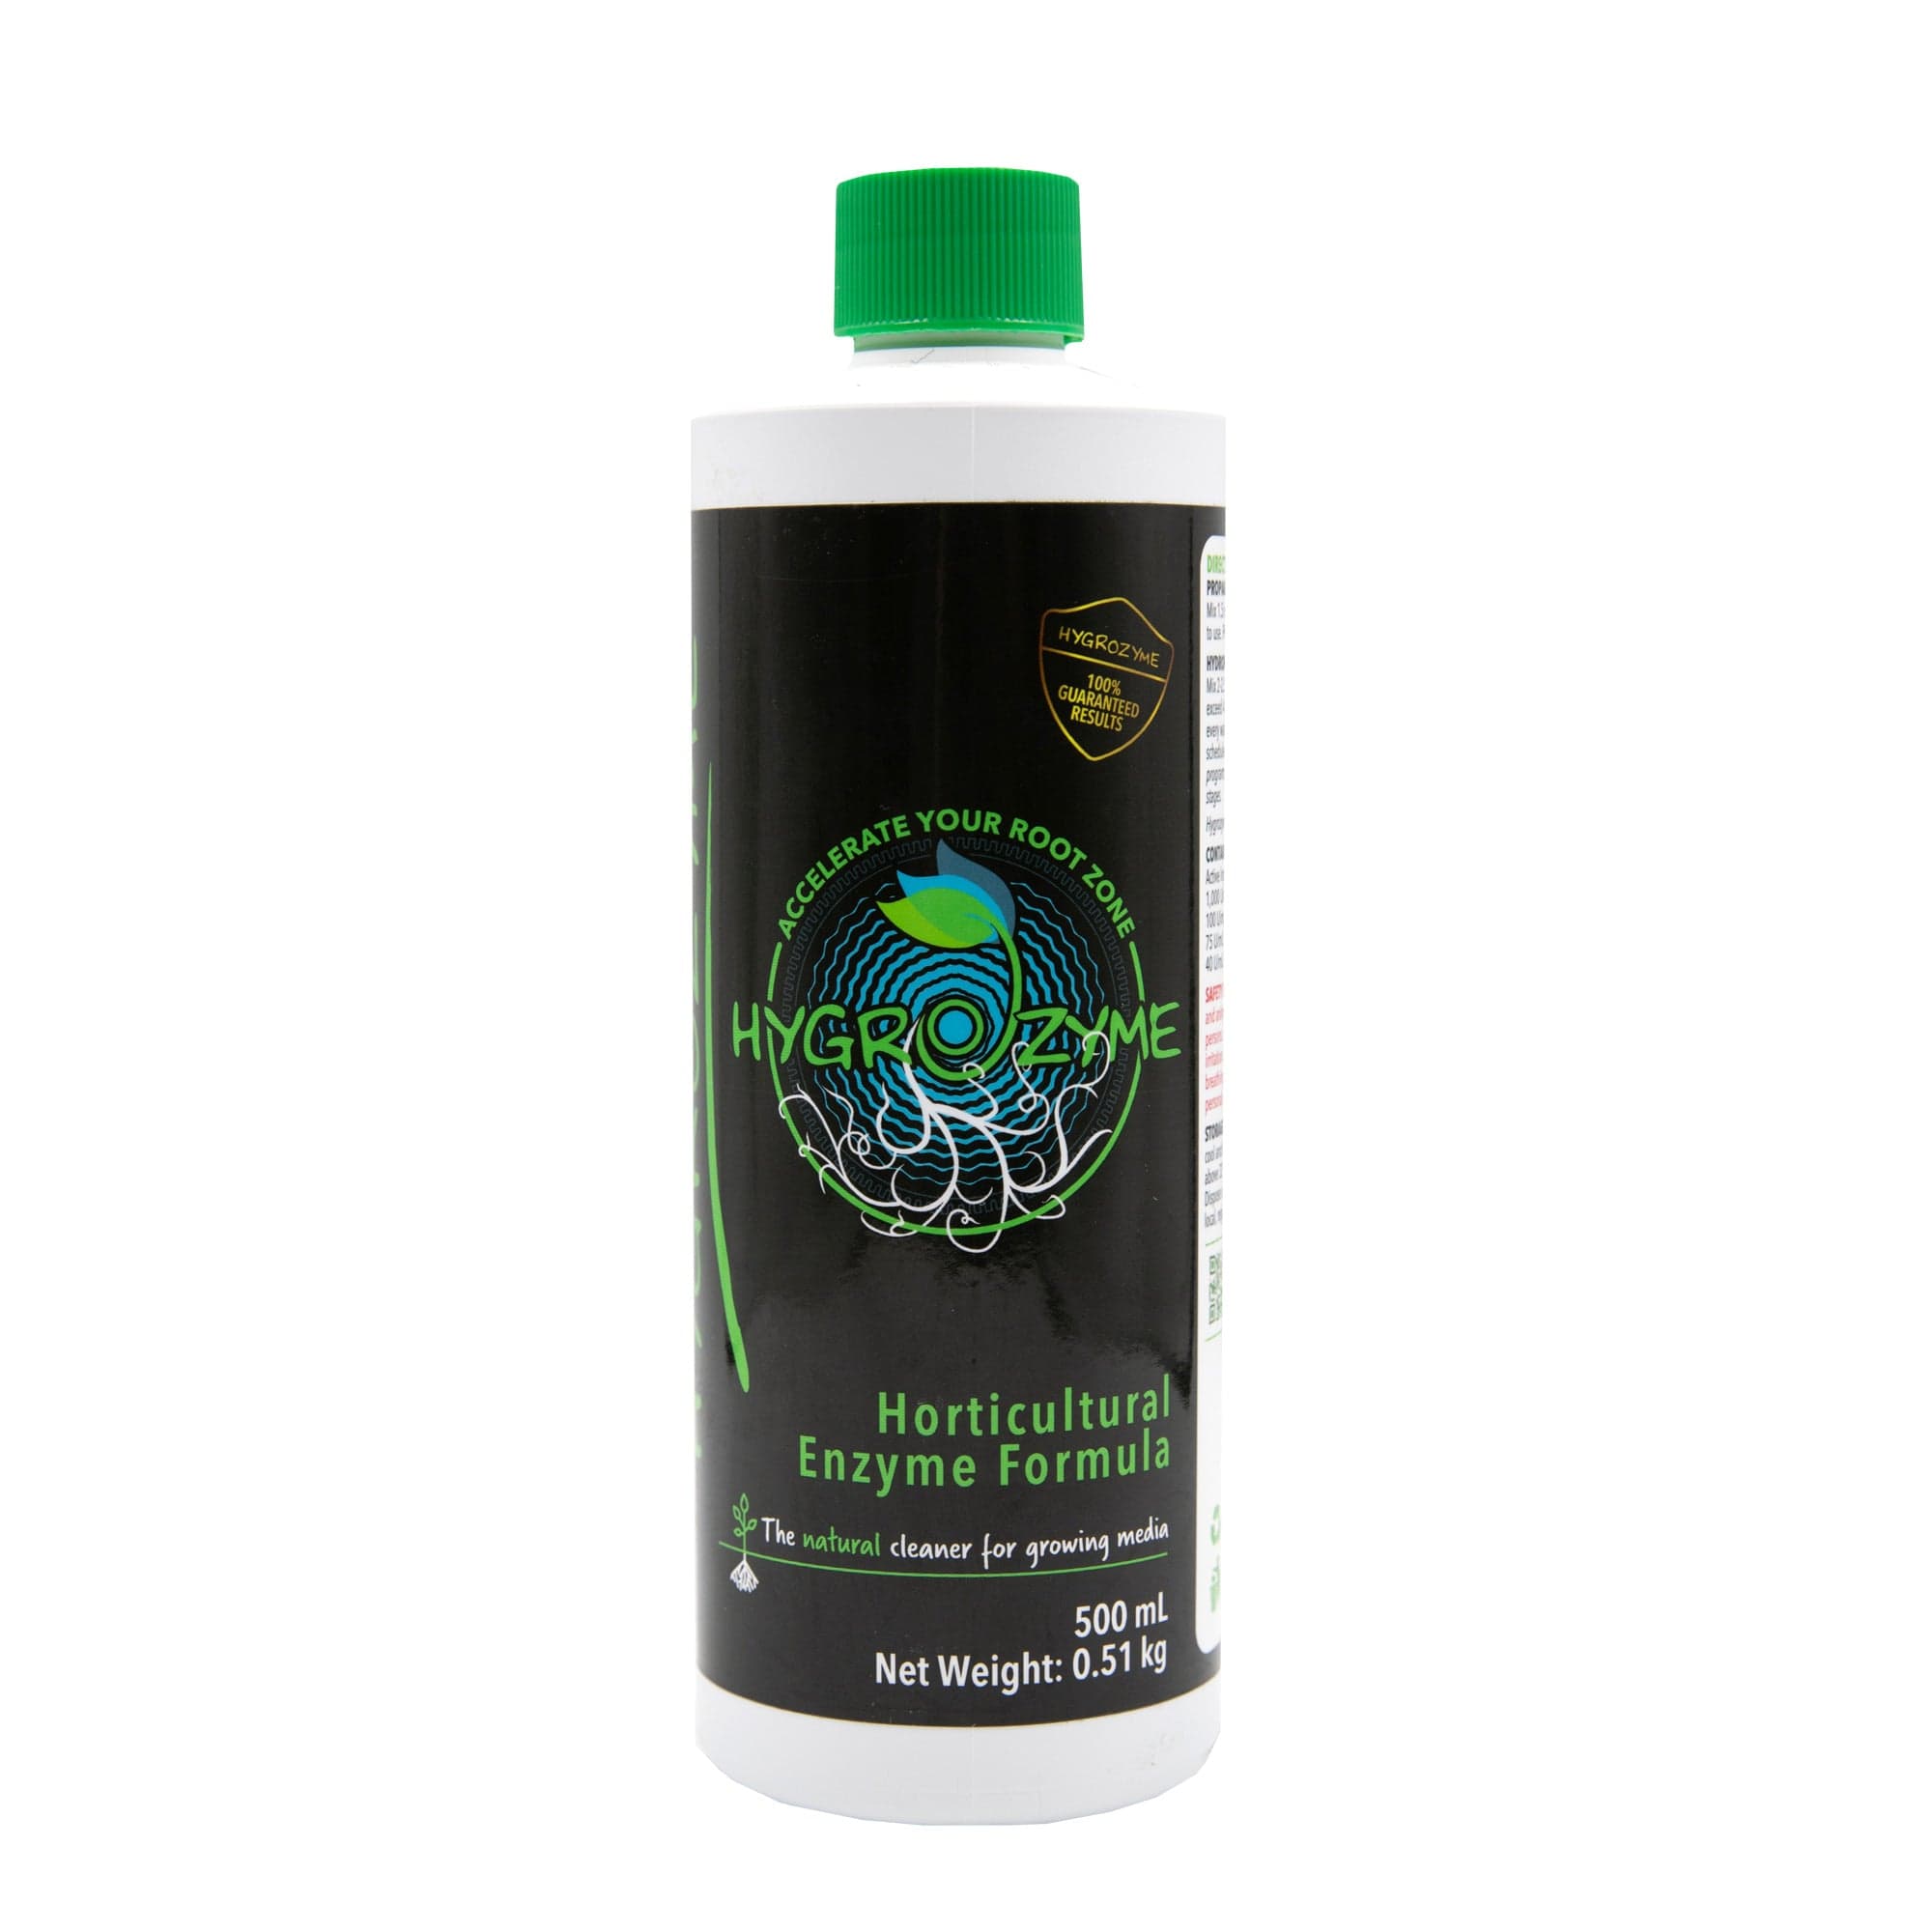 Dr Greenthumbs Hygrozyme (Horticultural Enzymes)